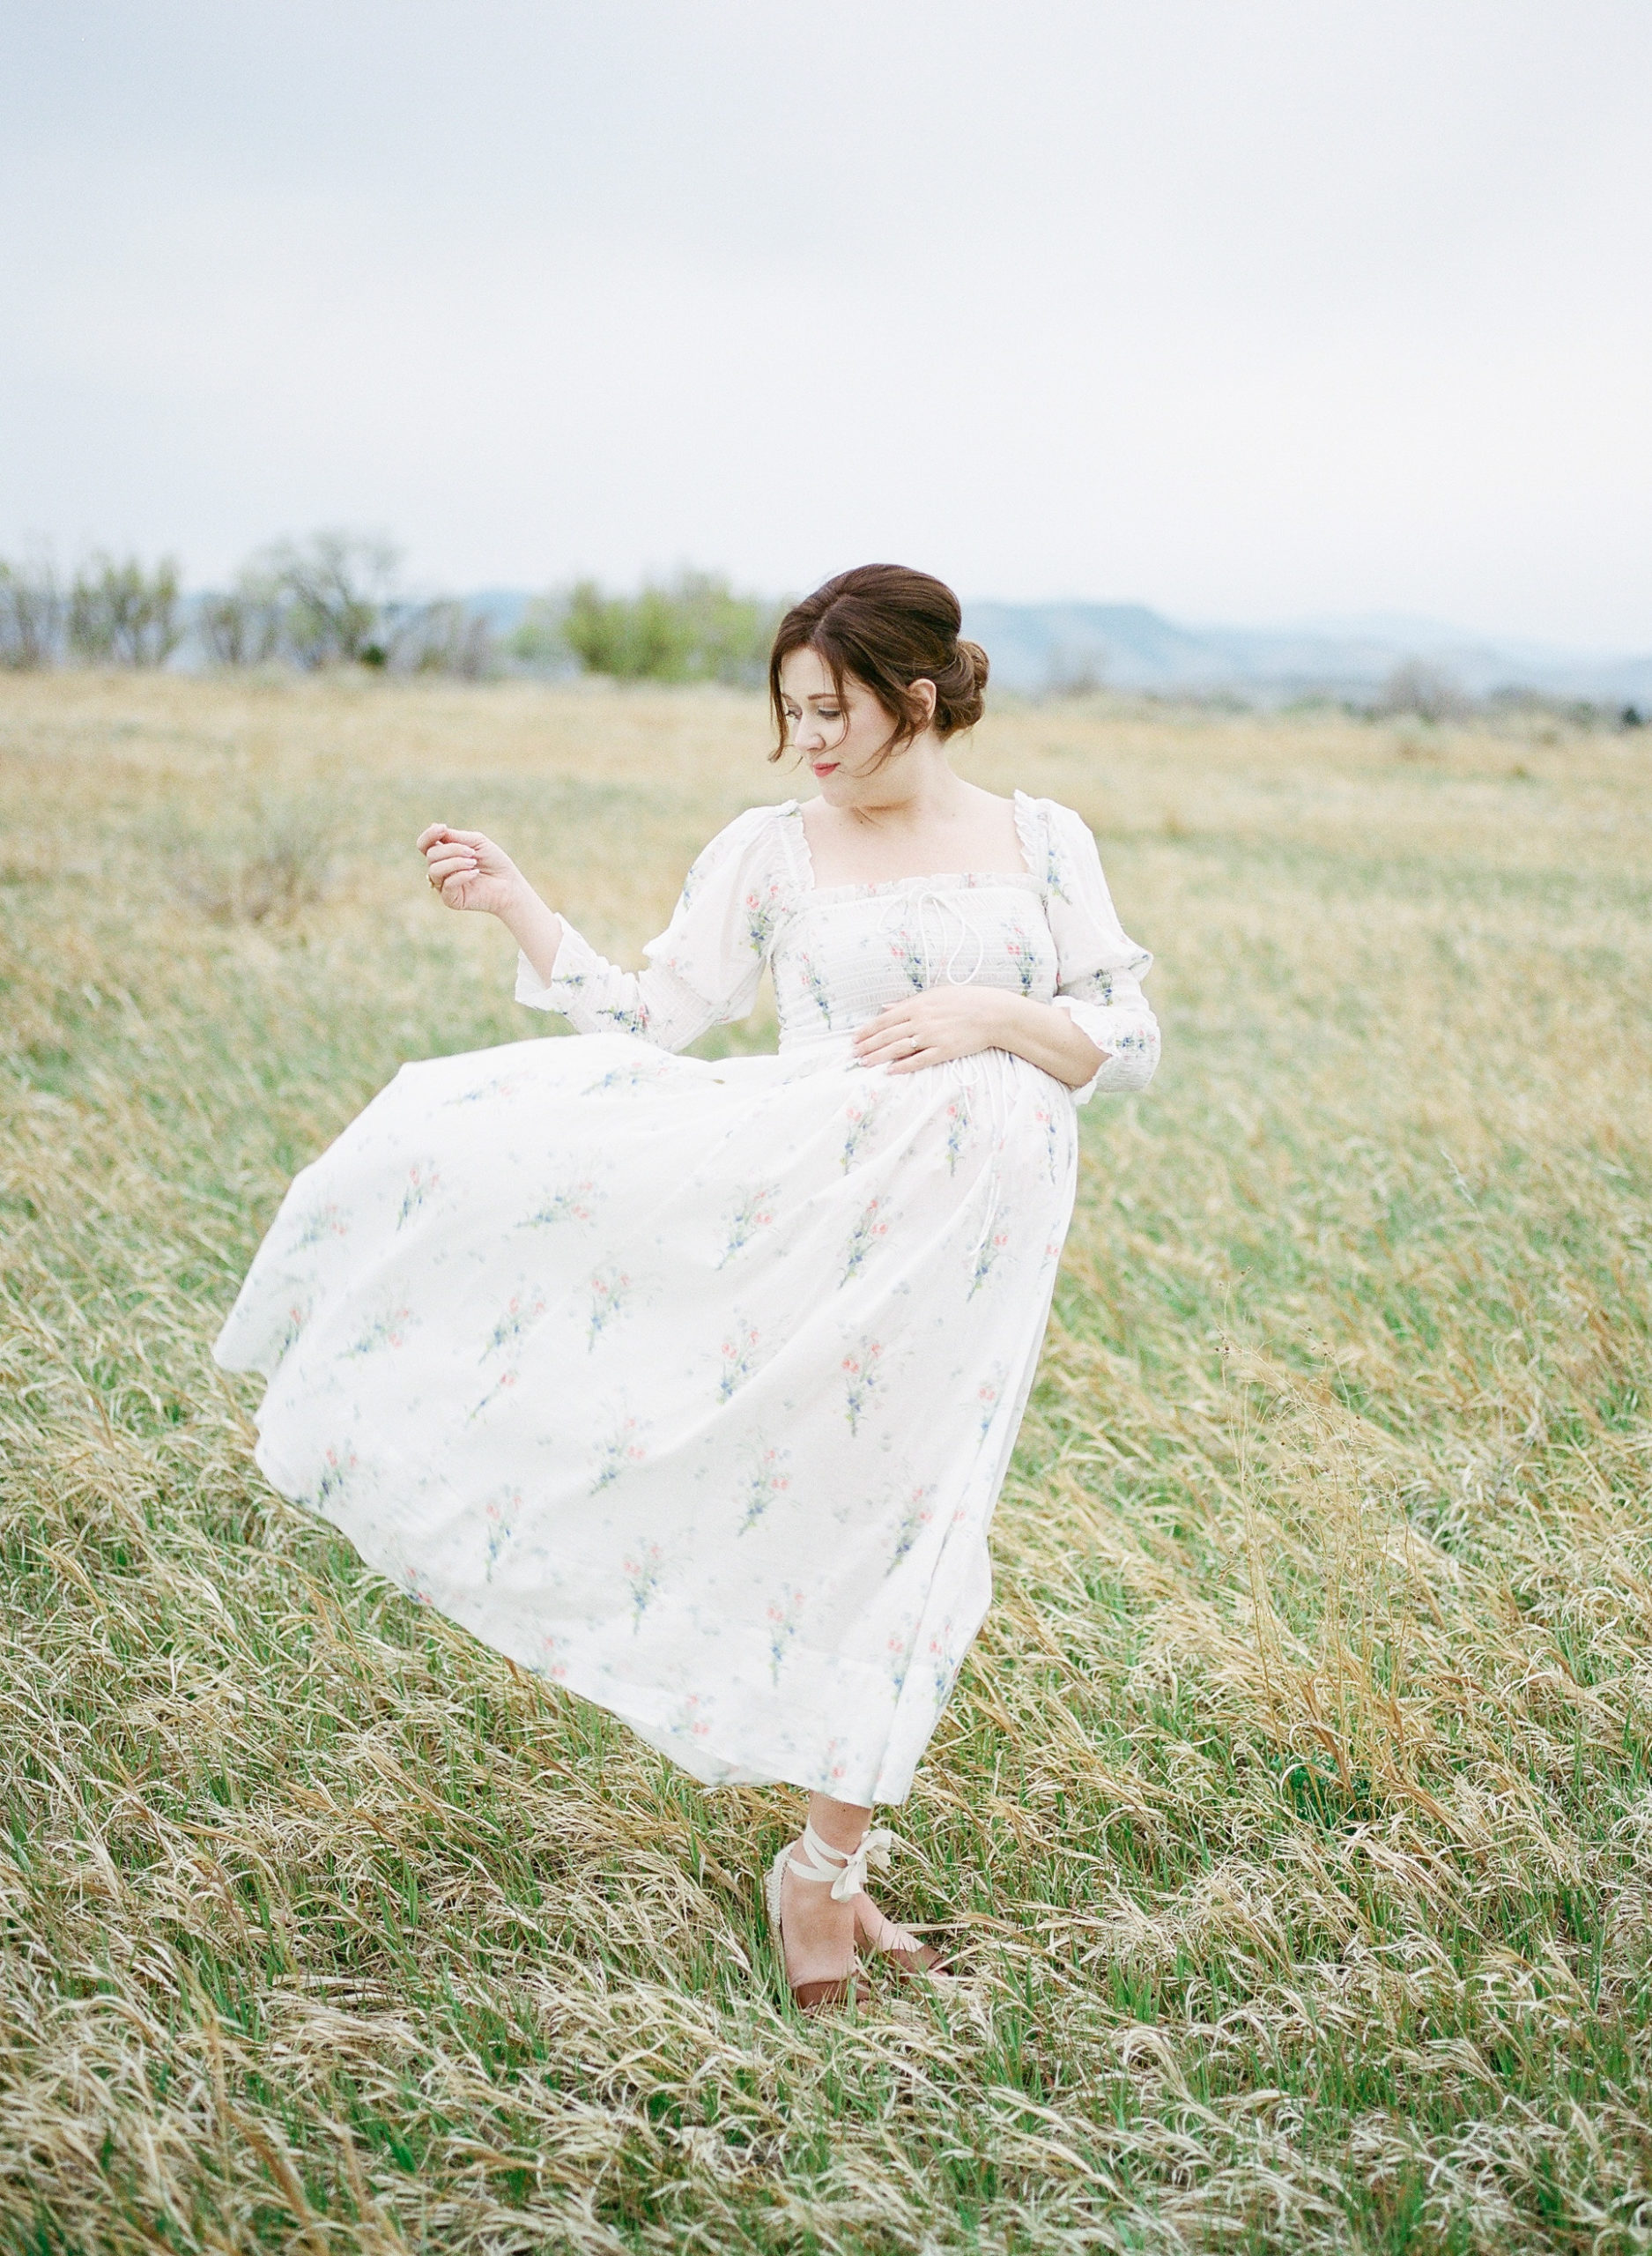 Pregnant Mama in a field with mountain views in the distance. Lots of movement shown in her hand and dress